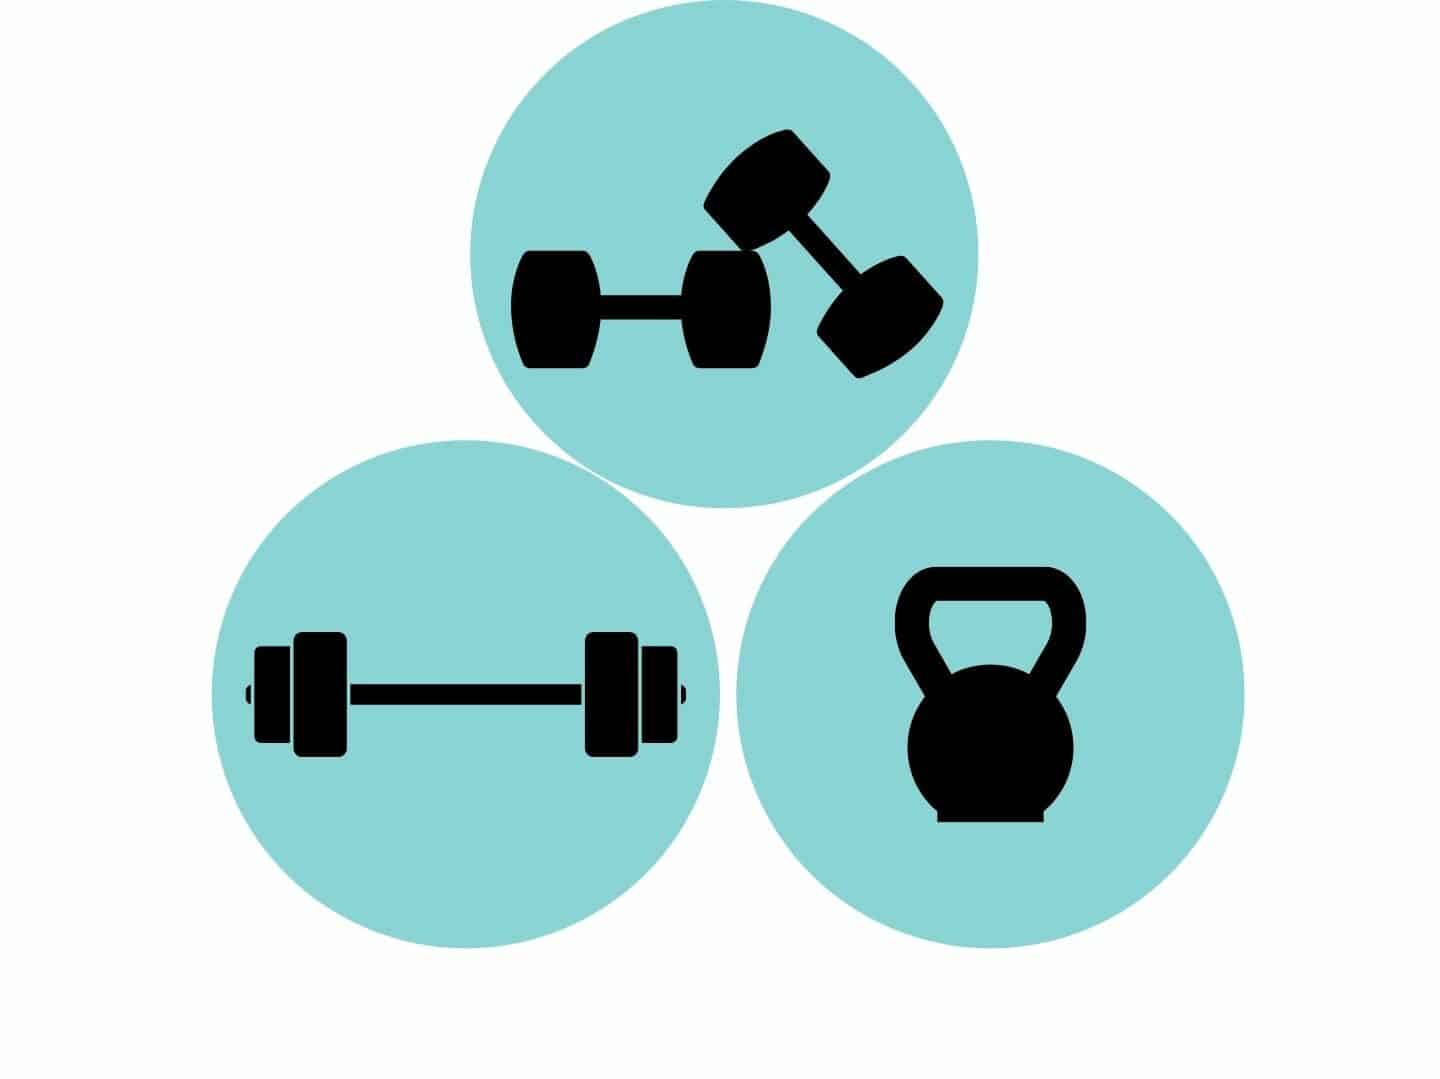 barbells, dumbbells, and kettlebells are all freeweights